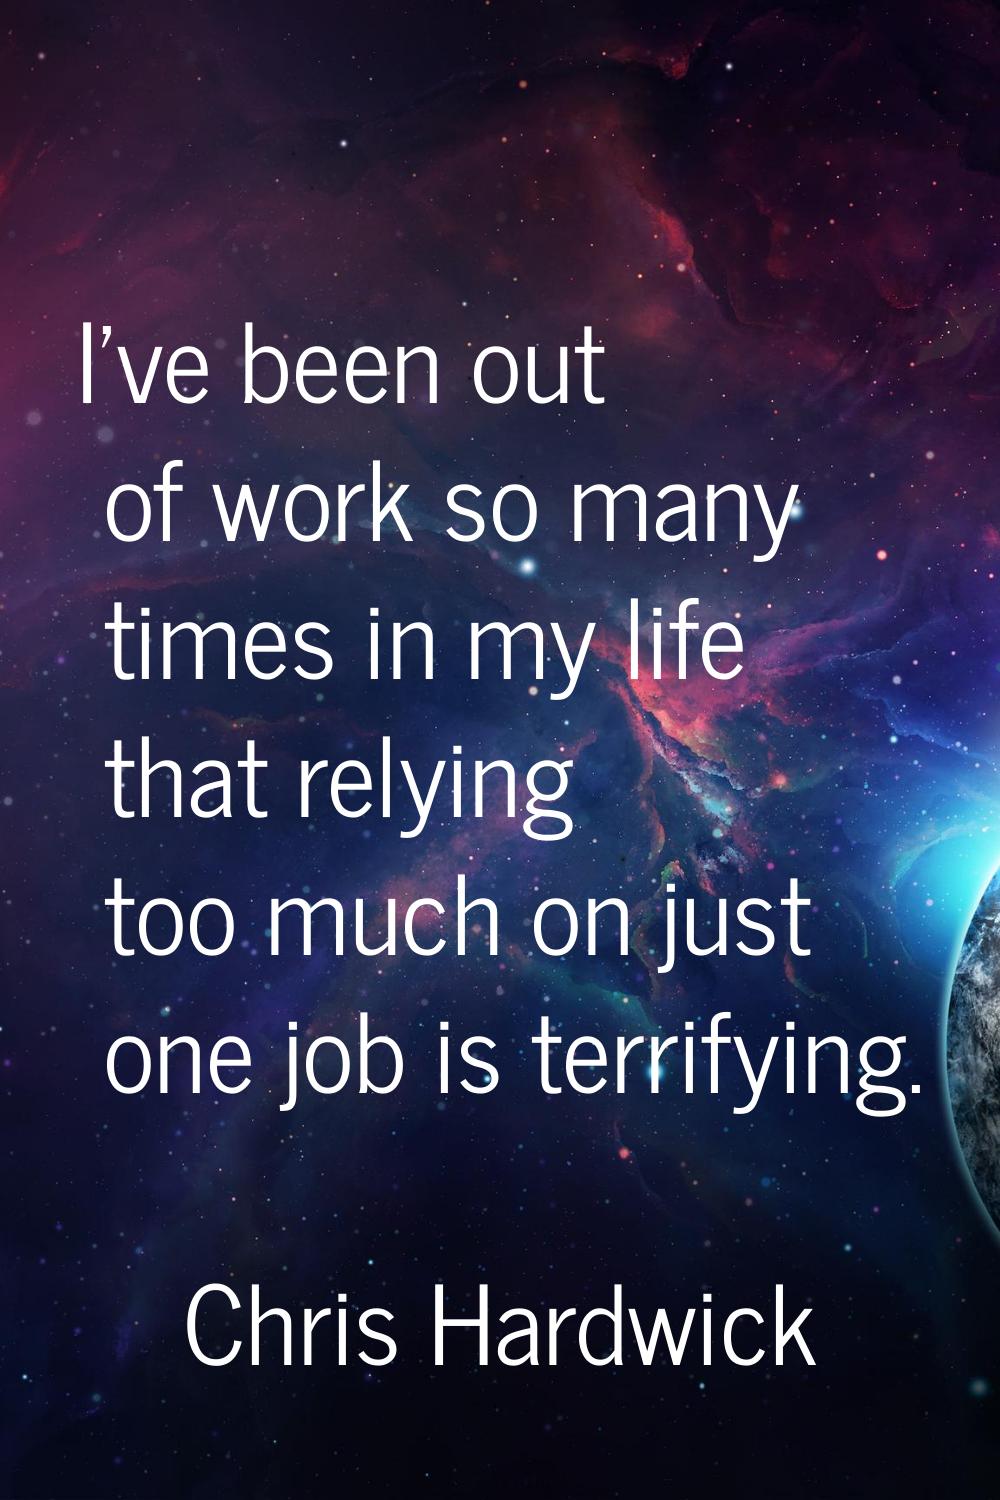 I've been out of work so many times in my life that relying too much on just one job is terrifying.